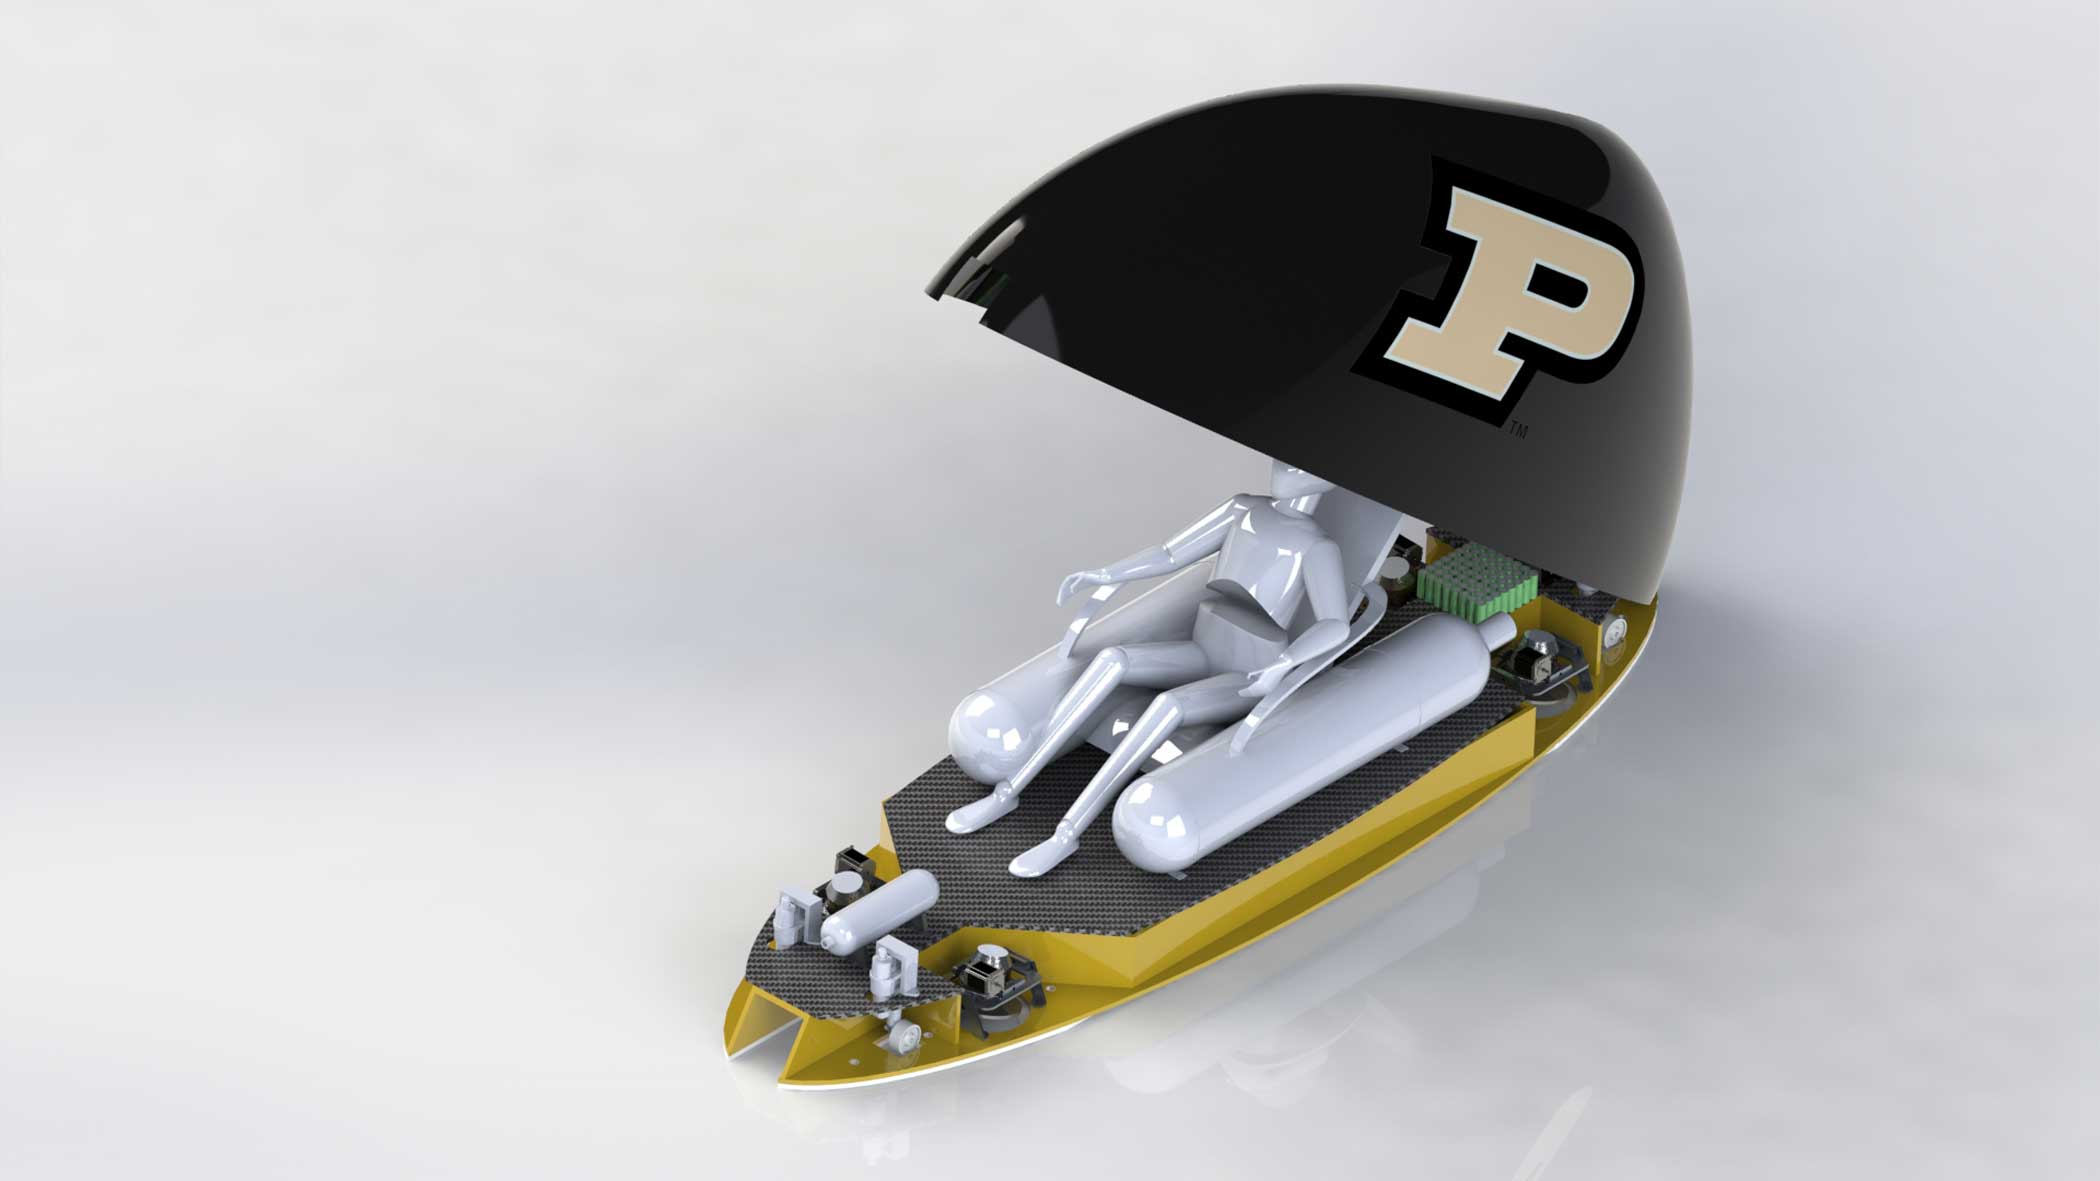 Purdue's Team
                              designed a carbon fiber structure that uses air bearings for levitation, permanent magnets and friction brakes for braking, and compressed air tanks for thrust.